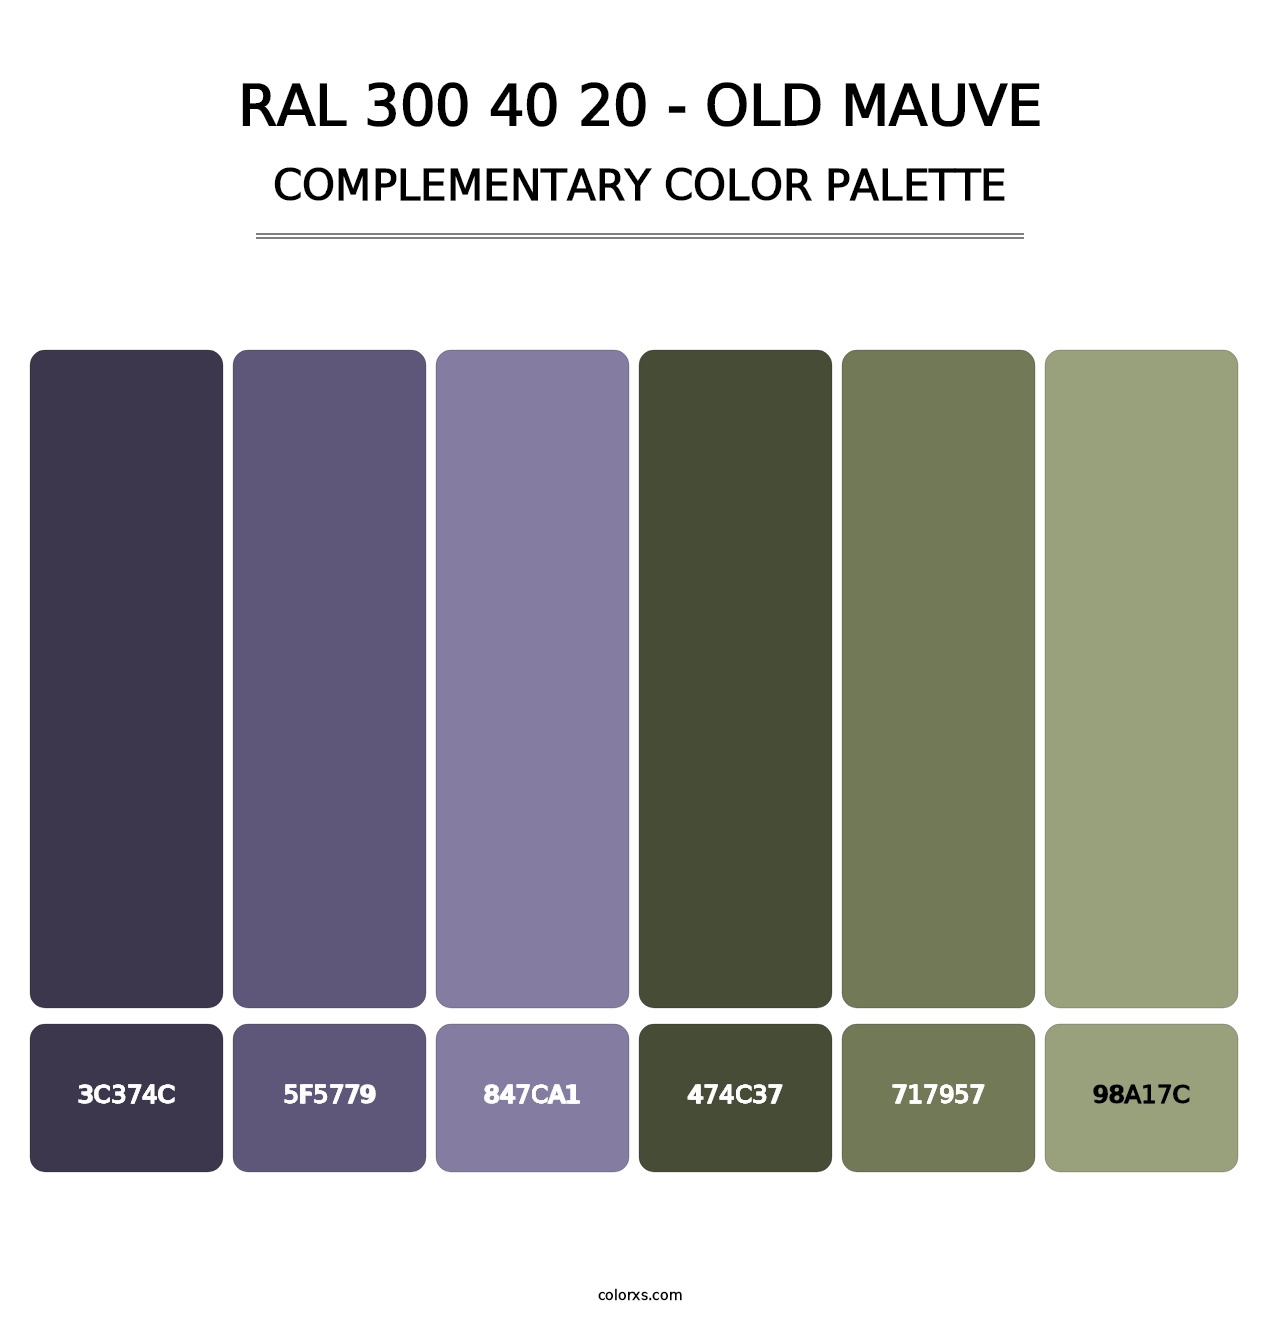 RAL 300 40 20 - Old Mauve - Complementary Color Palette